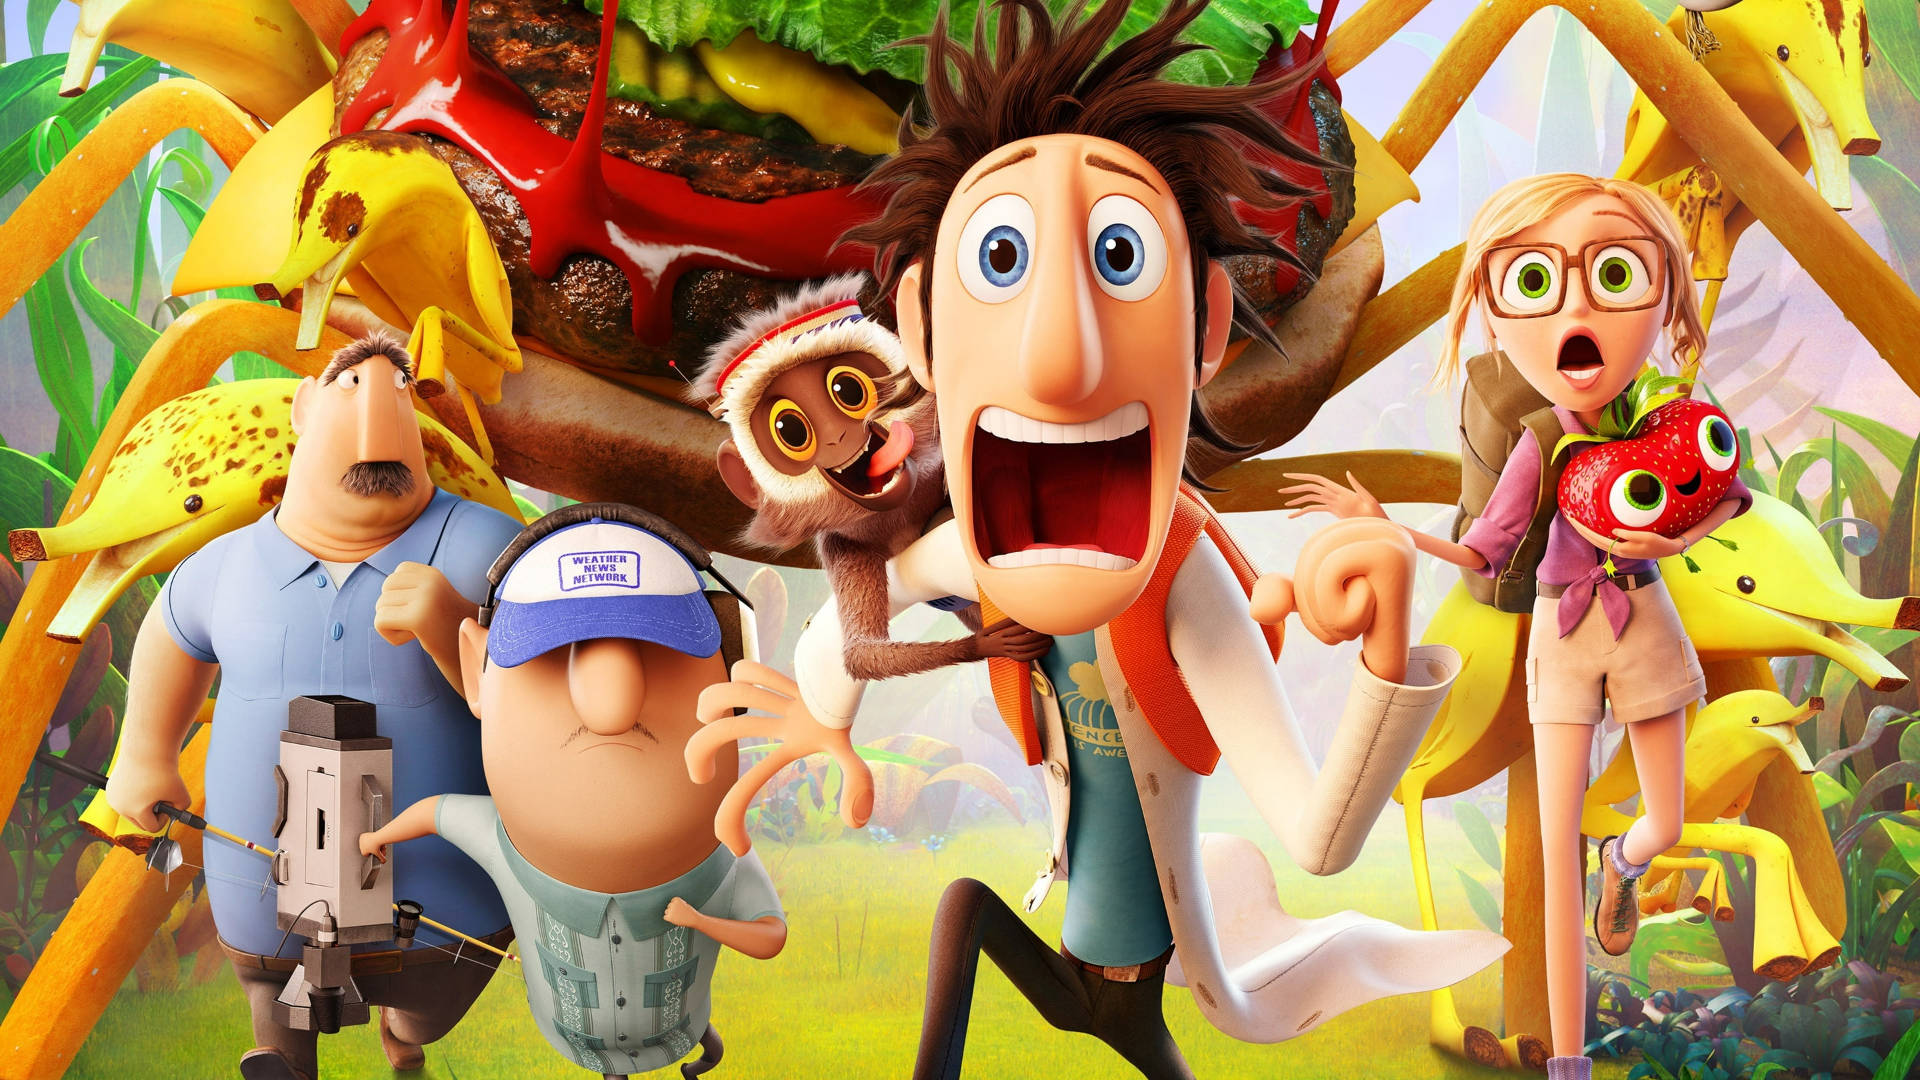 Cloudy With A Chance Of Meatballs 2 Wallpaper